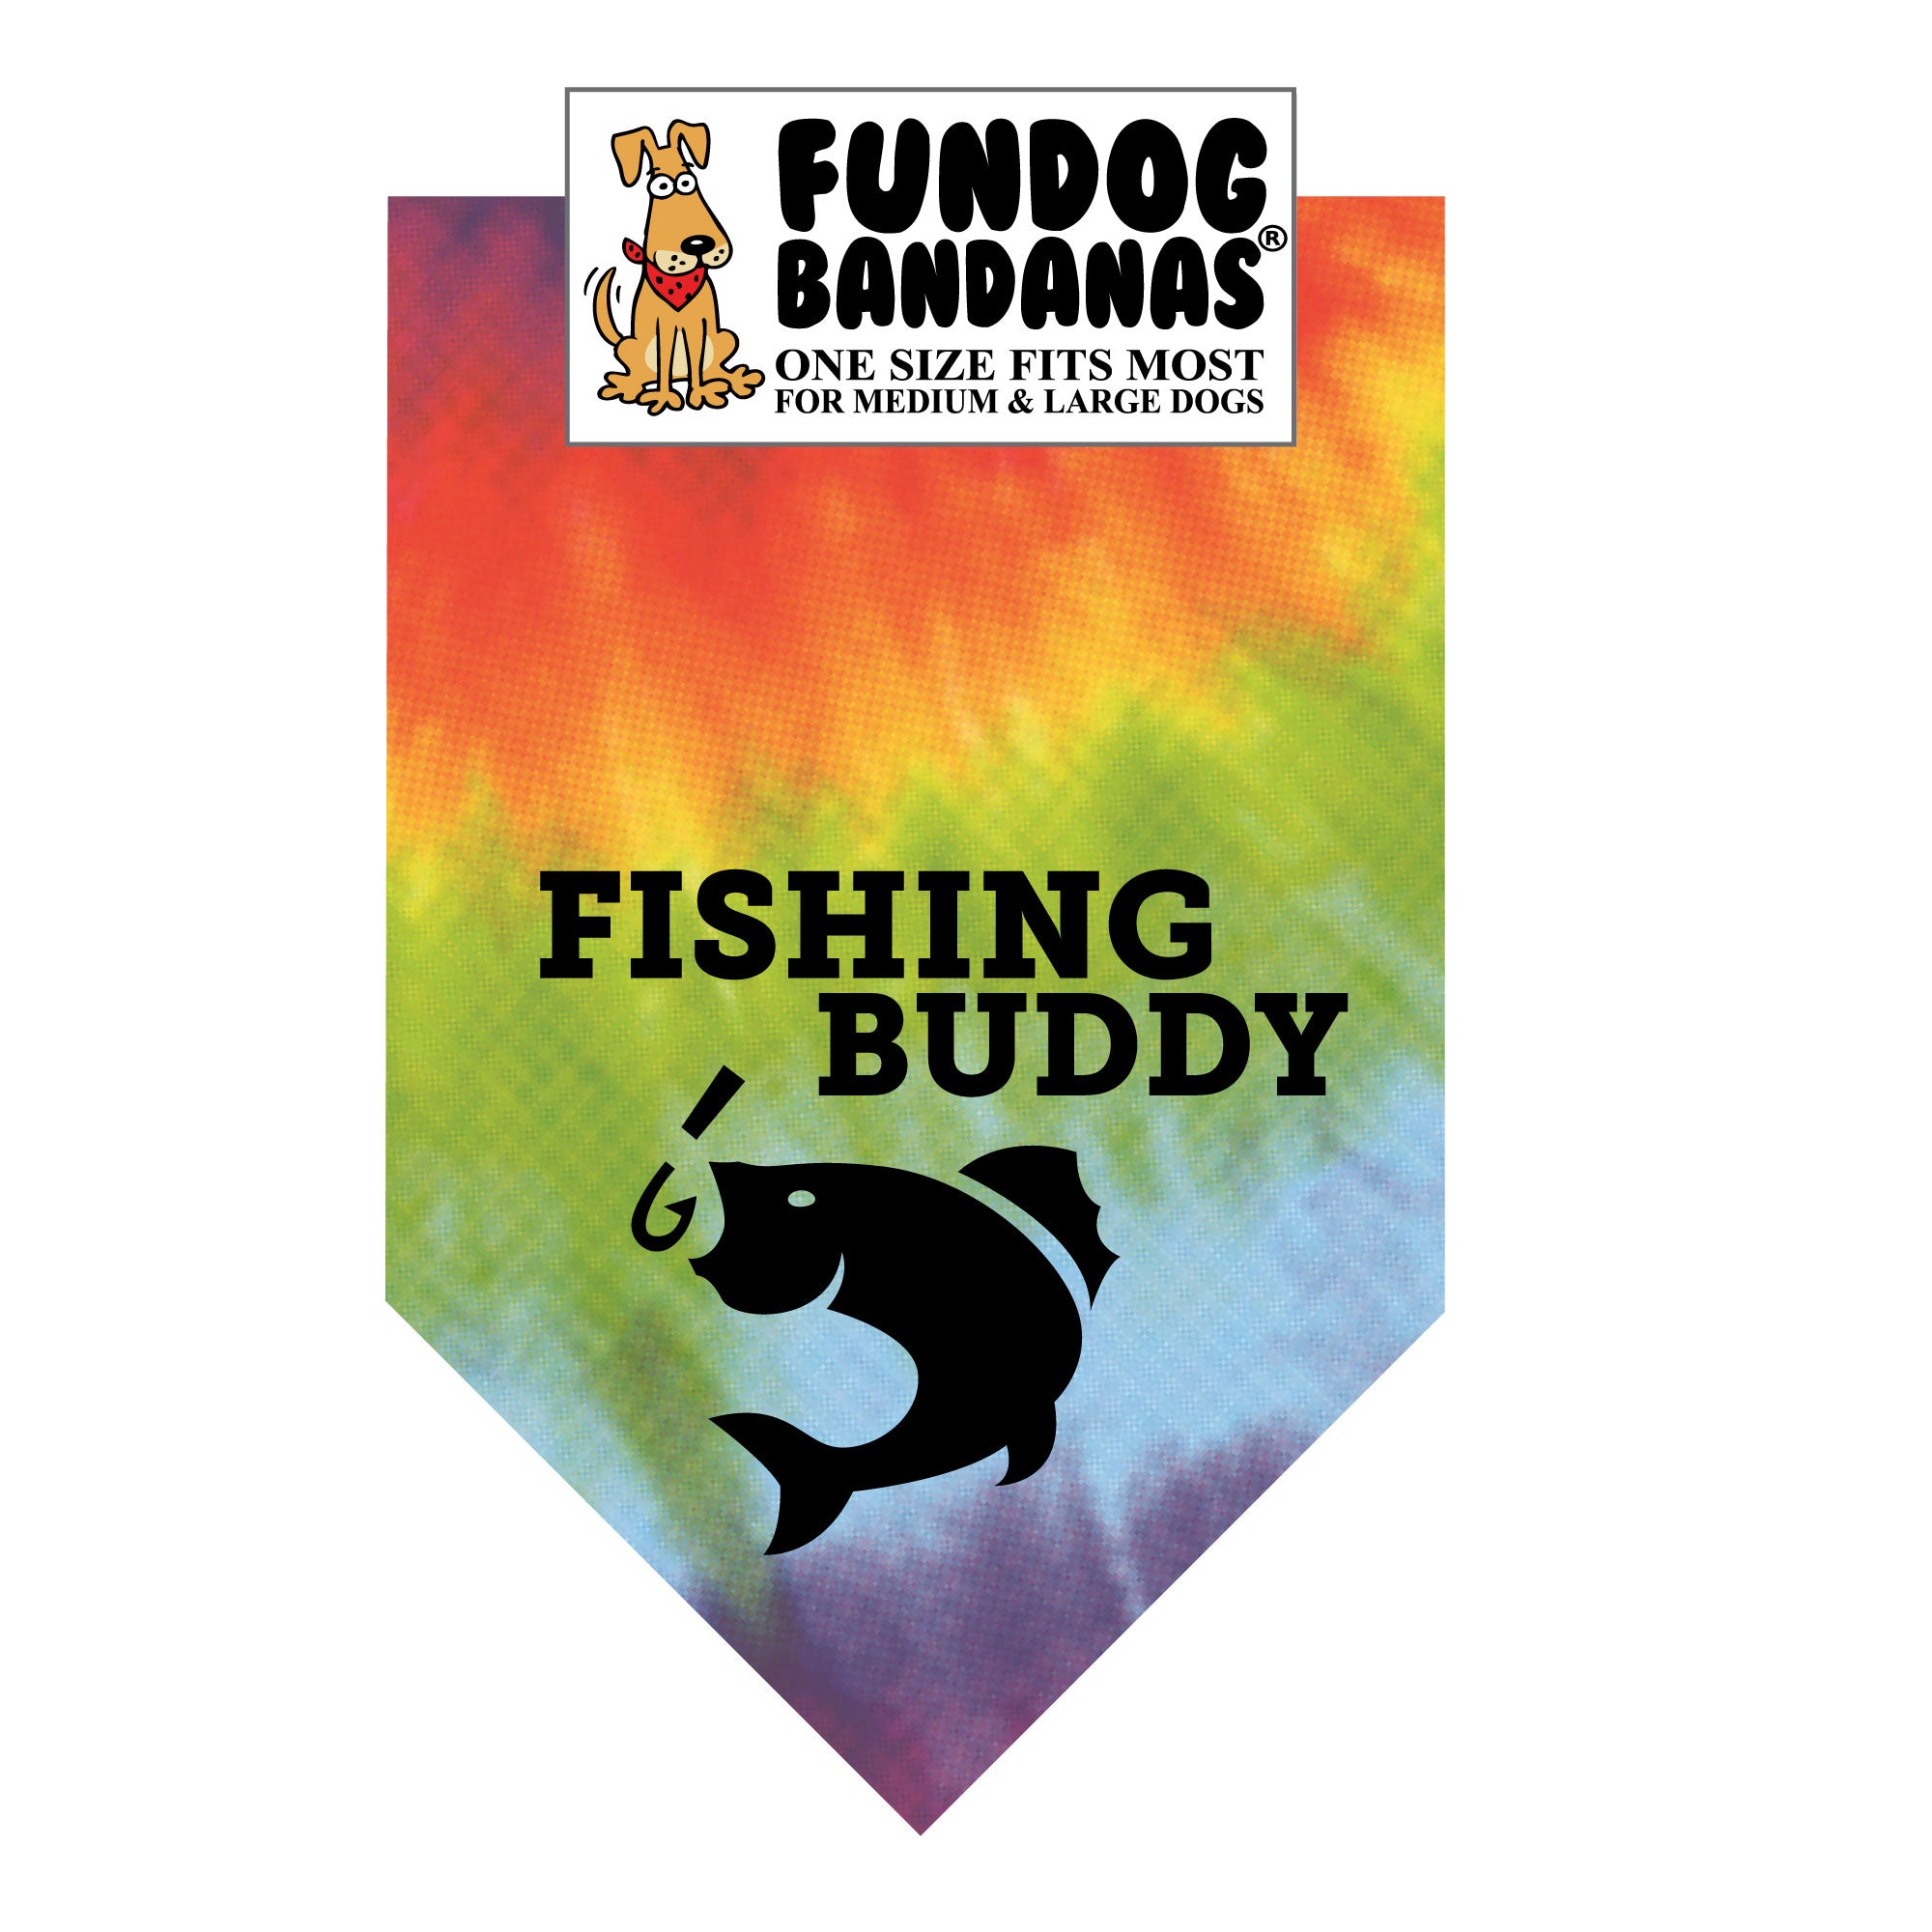 Fun Dog Bandana - Fishing Buddy - One Size Fits Most for Med to LG Dogs, Tie Dye Pet Scarf, White